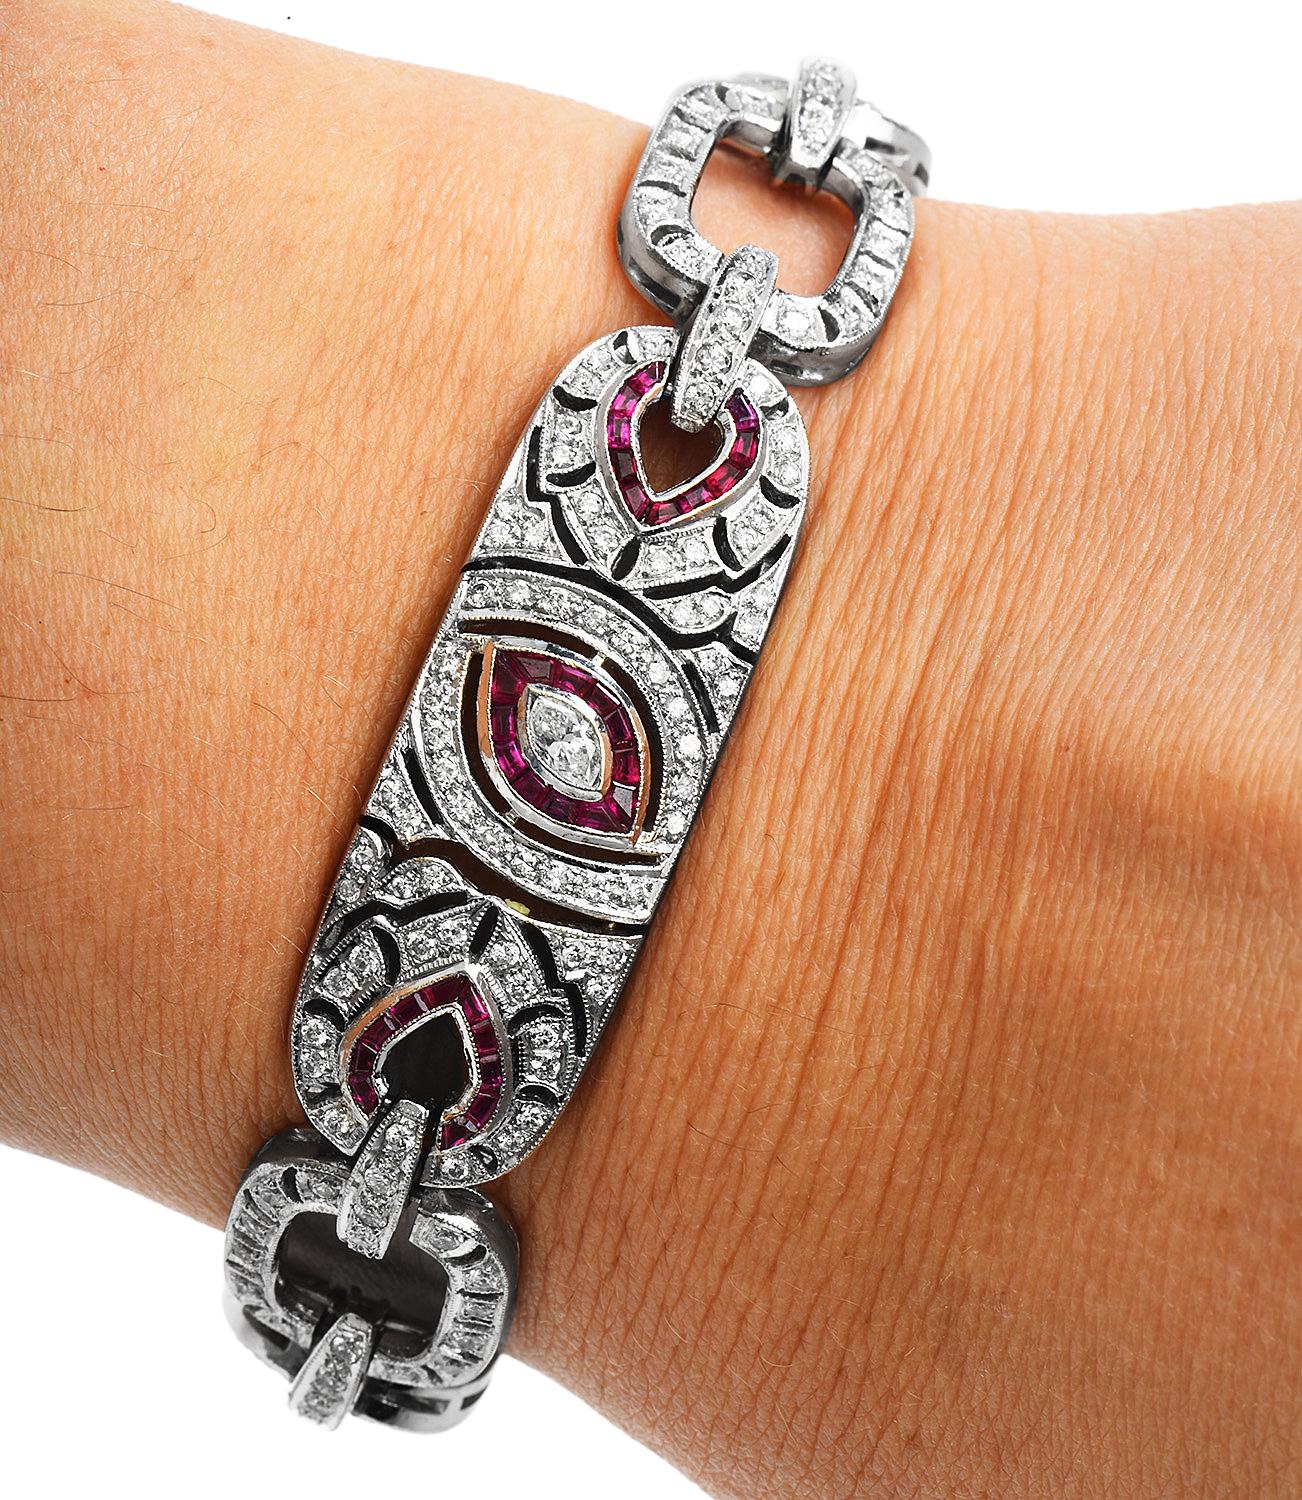 This Geometric- Deco design 18k white gold bracelet, inspired by the 